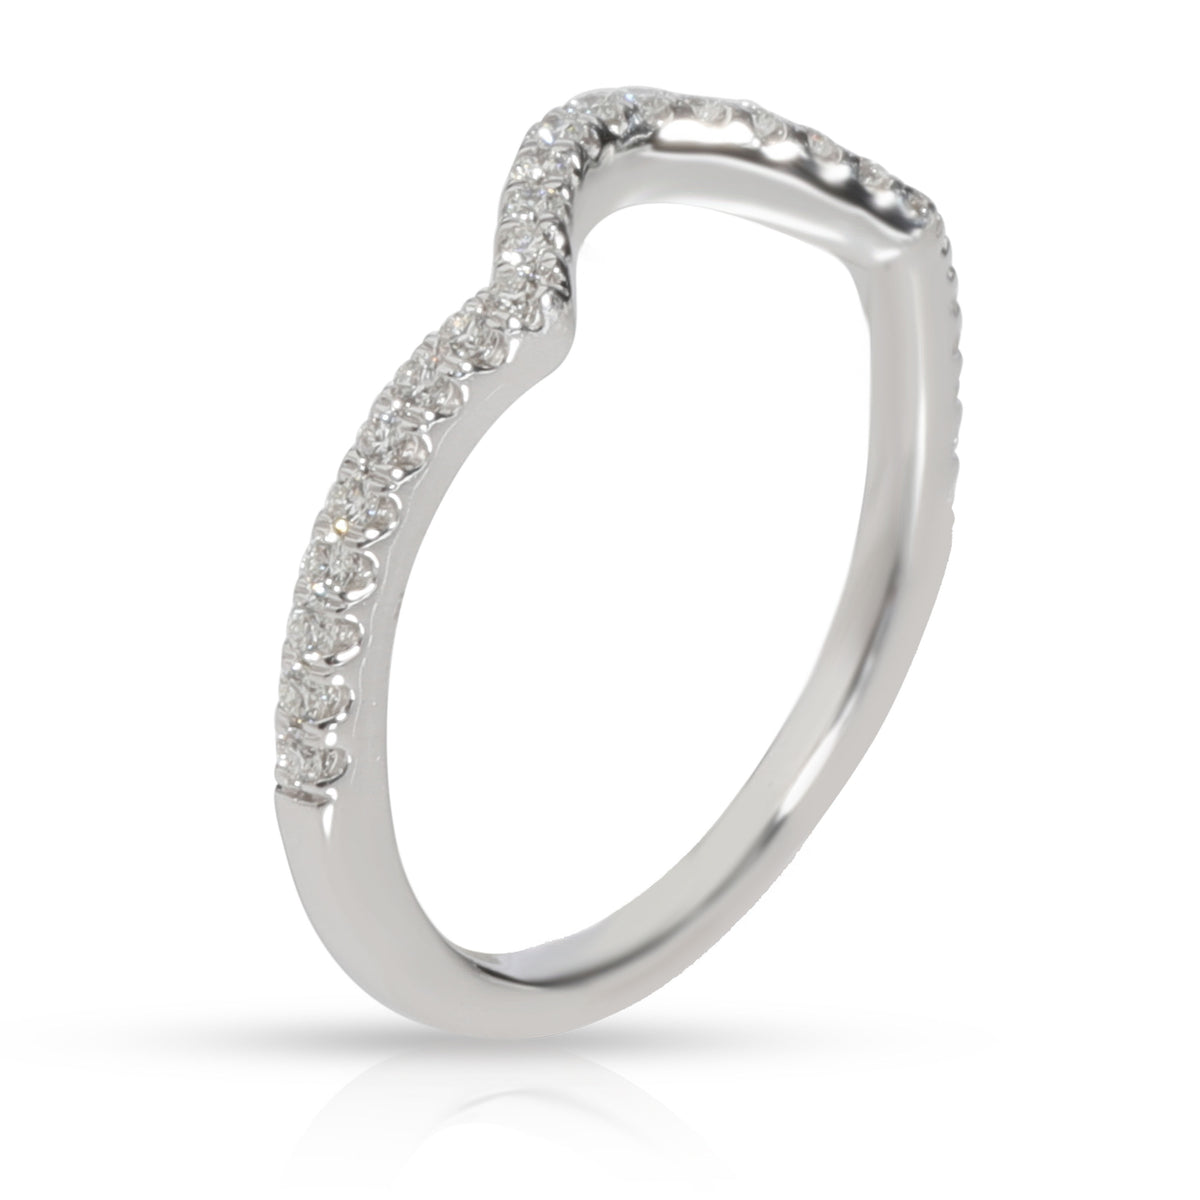 Blue Nile Curved Diamond Wedding Band in 14K White Gold 0.17 CTW